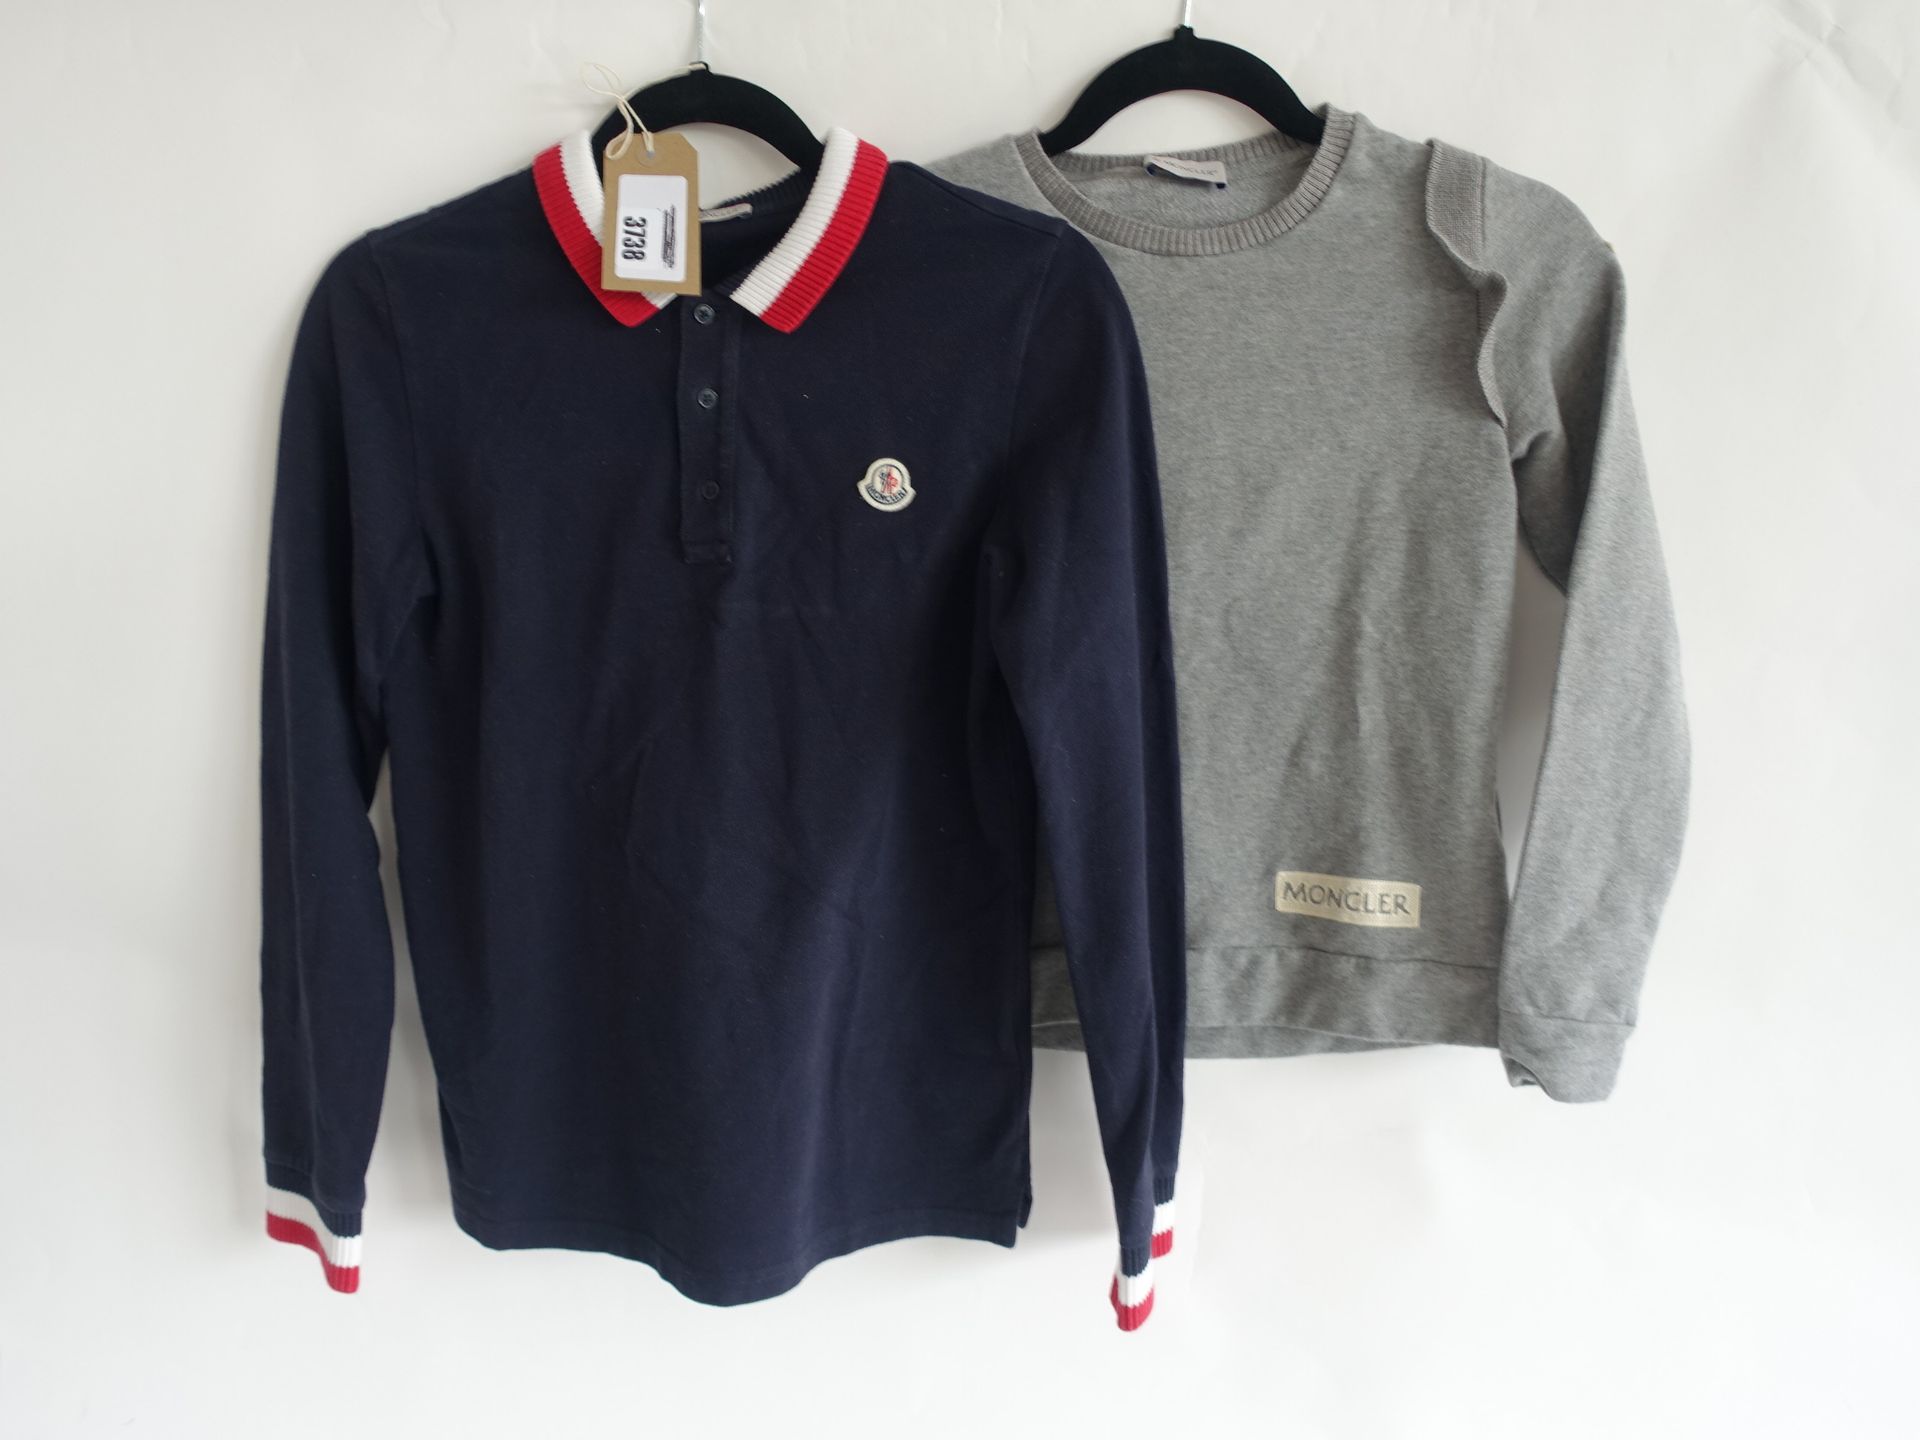 Moncler blue polo shirt size 14 years (used) and Moncler grey jumper size 12 years (used)